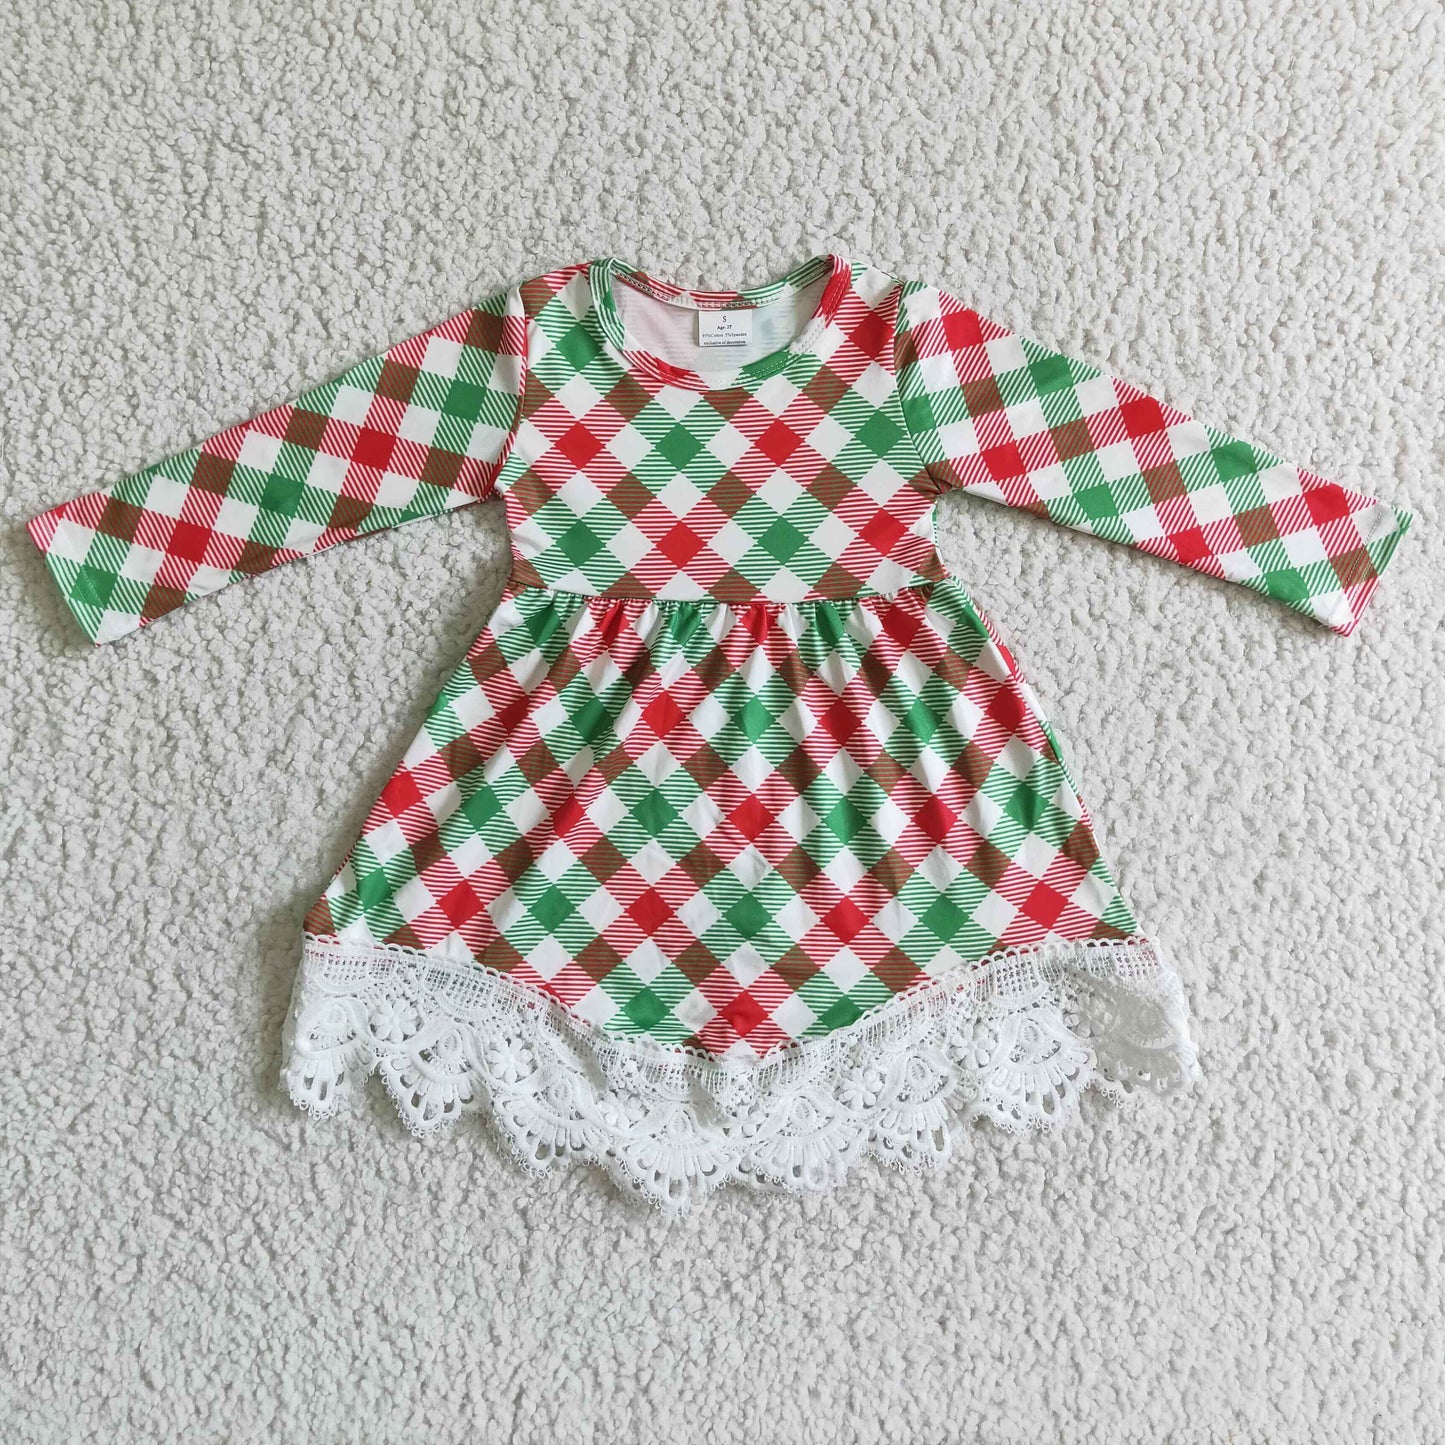 Green red plaid lace kids girls Christmas dresses